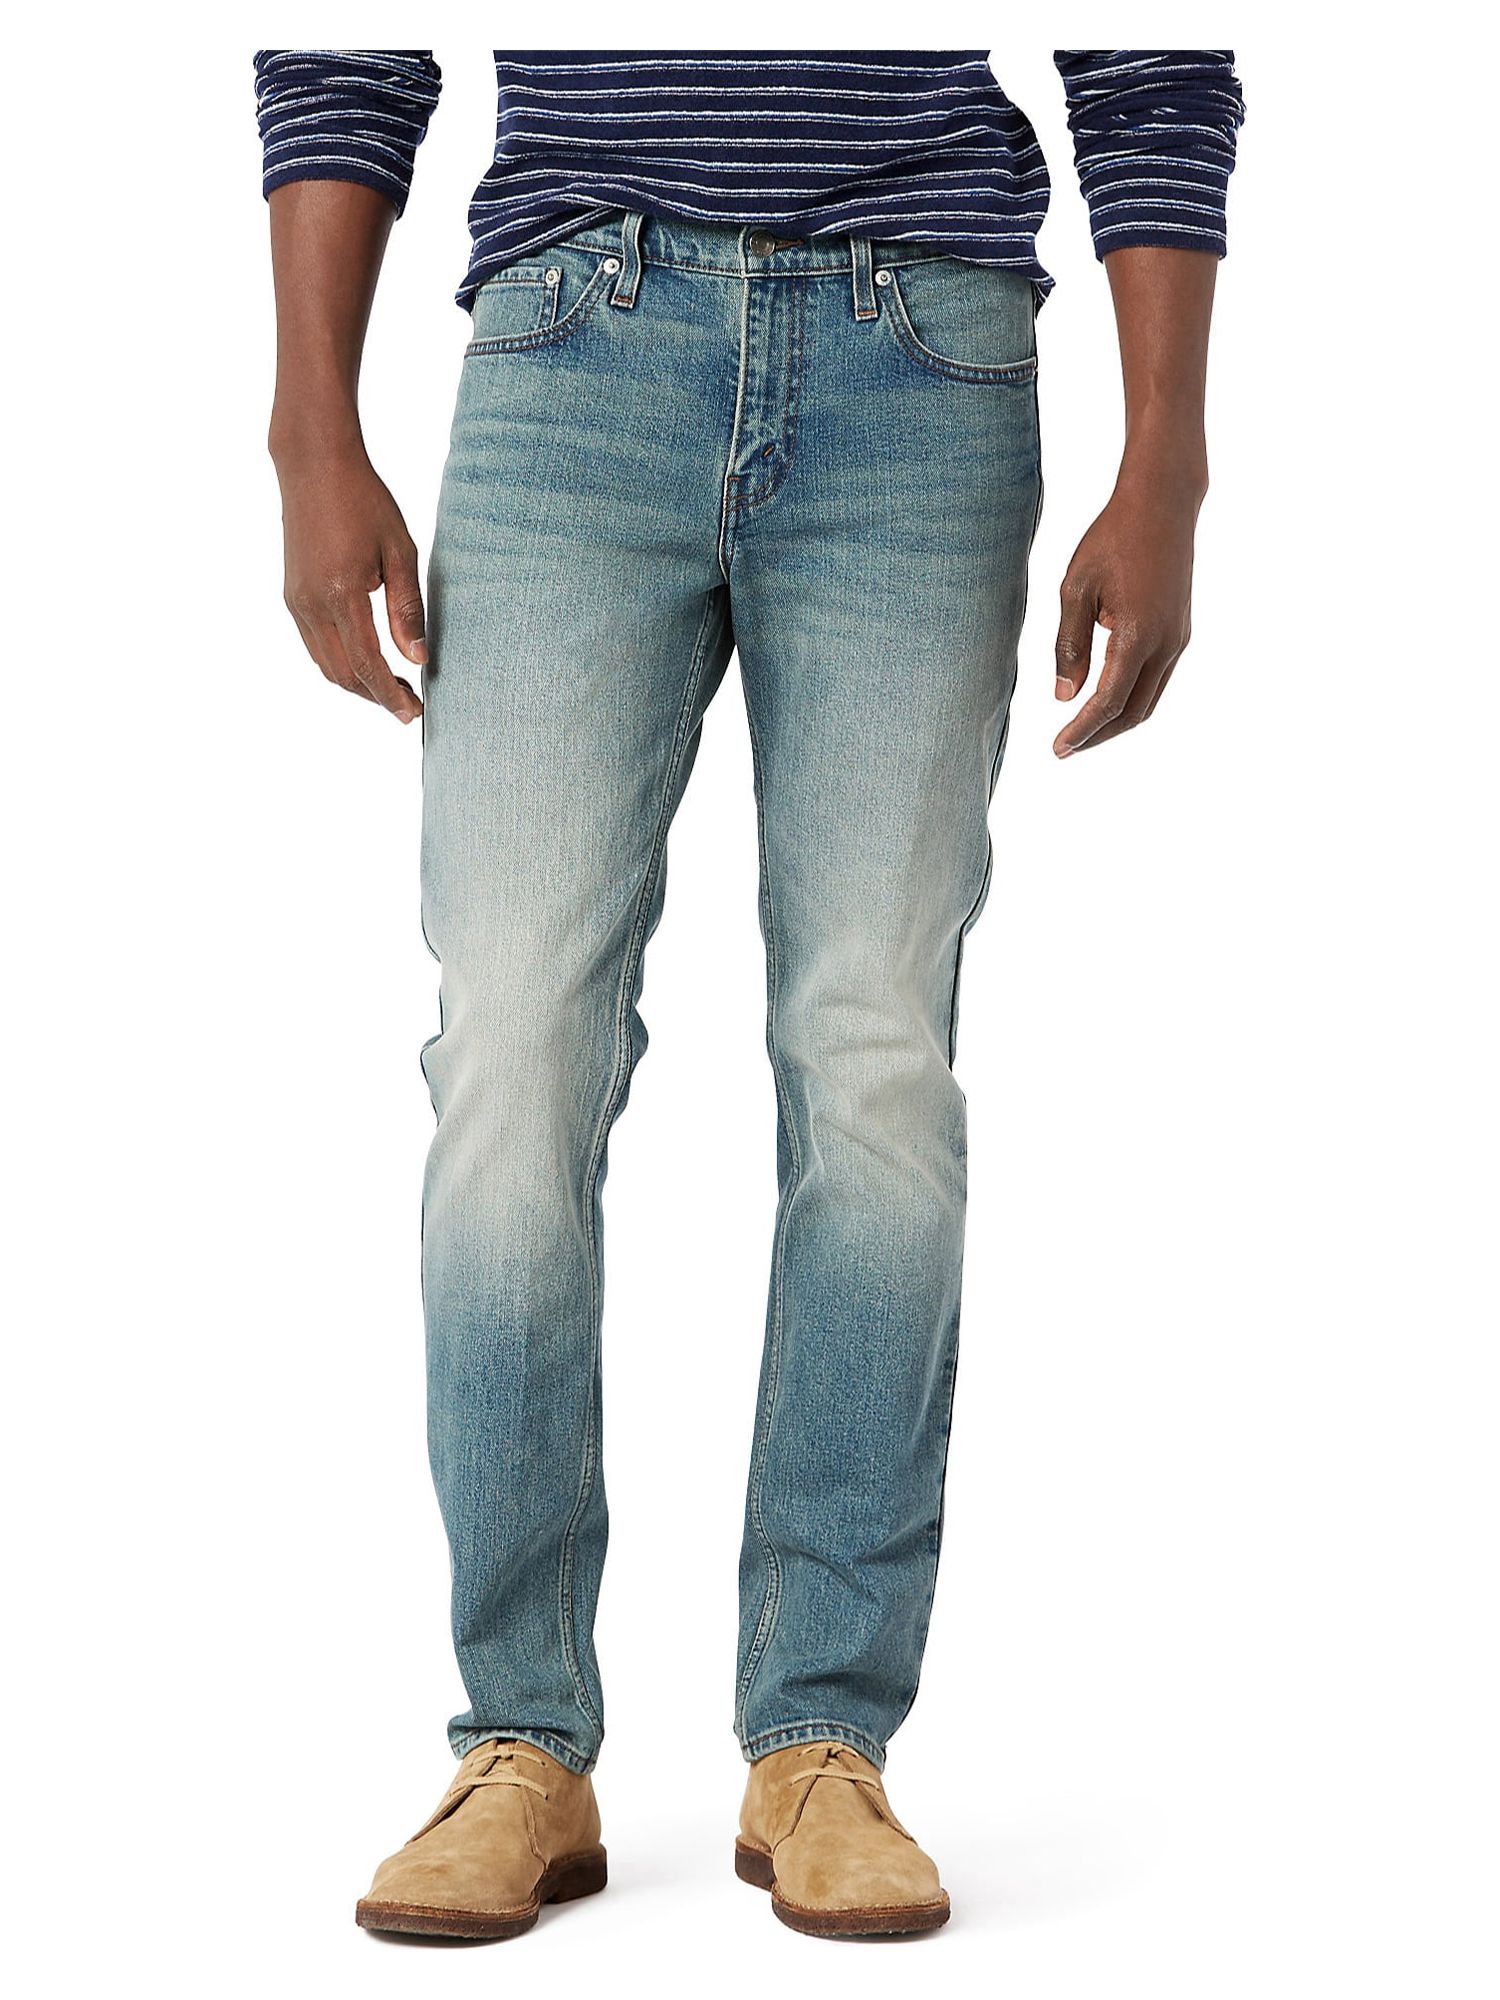 Signature by Levi Strauss & Co. Men’s and Big and Tall Slim Fit Jeans - image 1 of 5